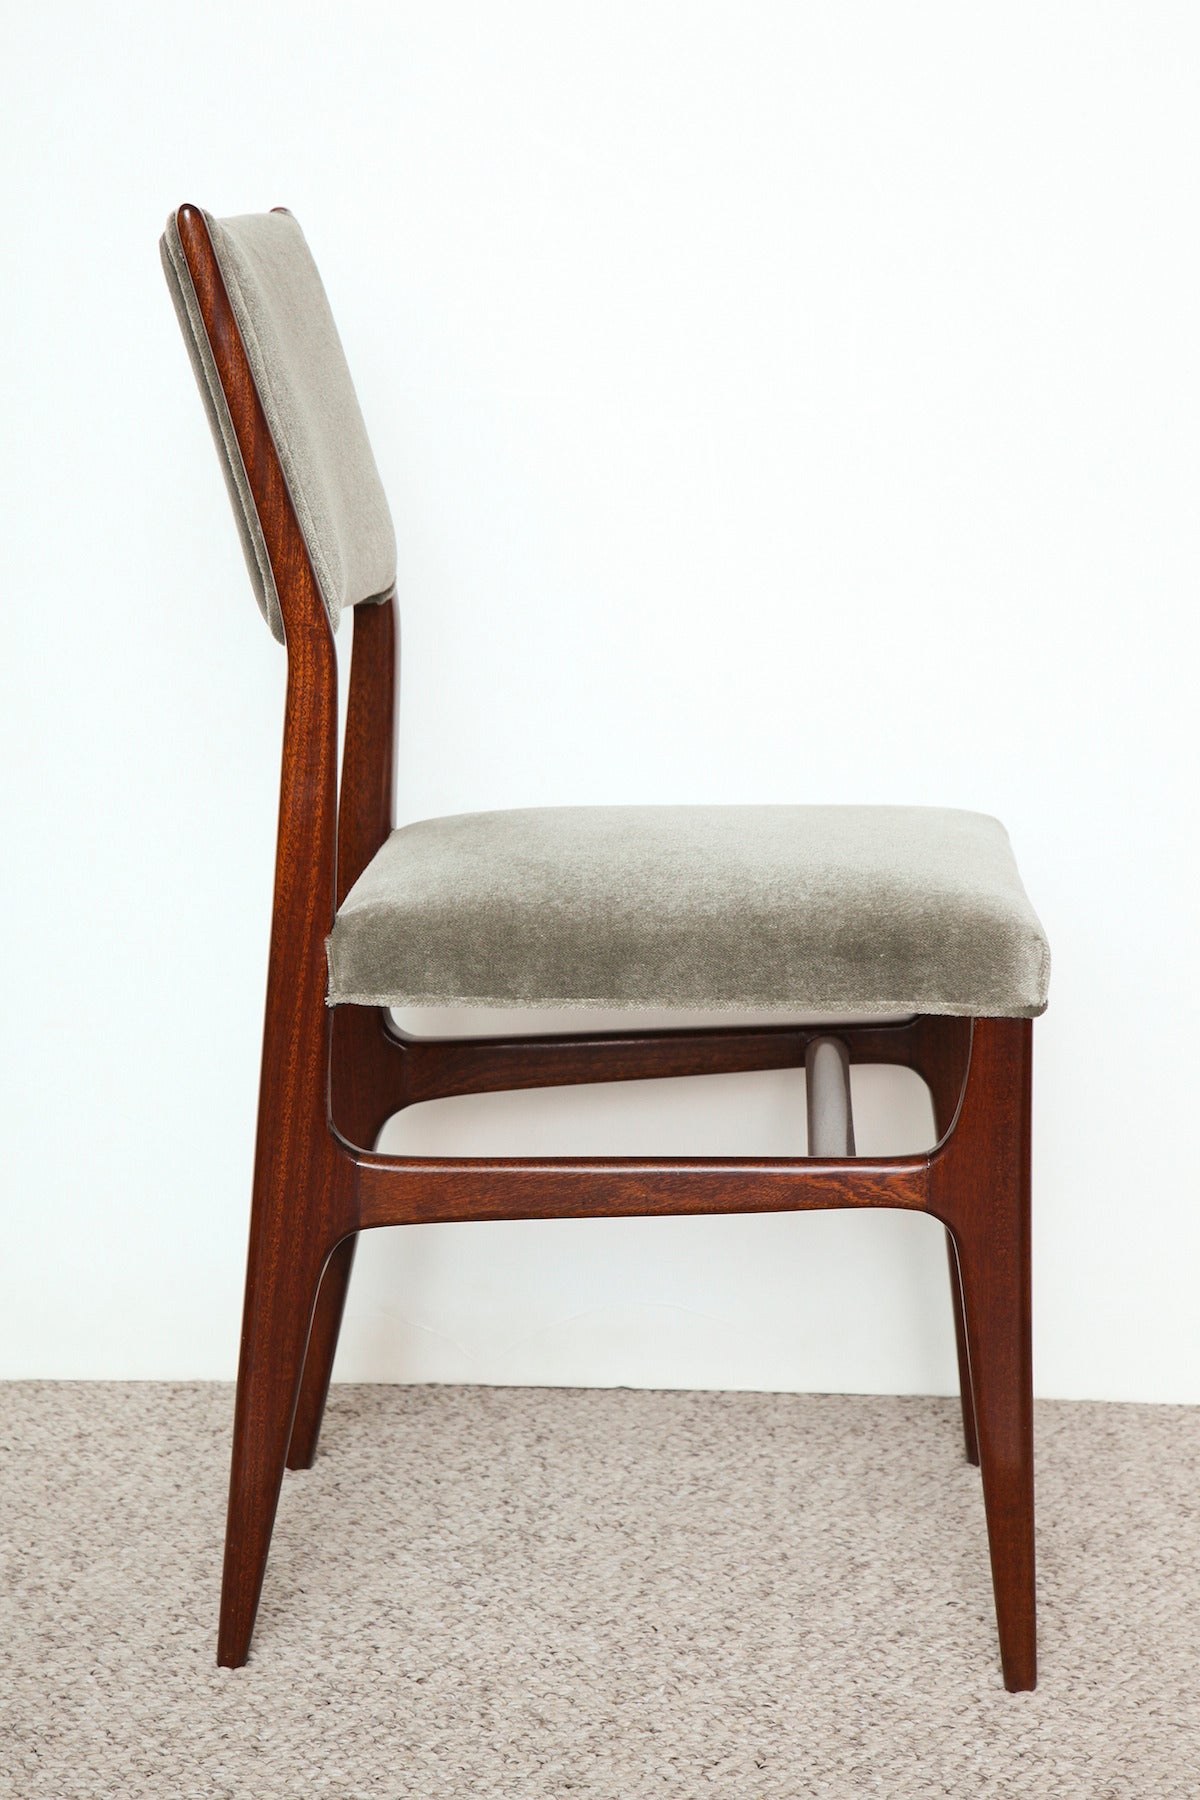 Iconic side chair, with walnut frame, tapering legs, and uphostered seat and back.